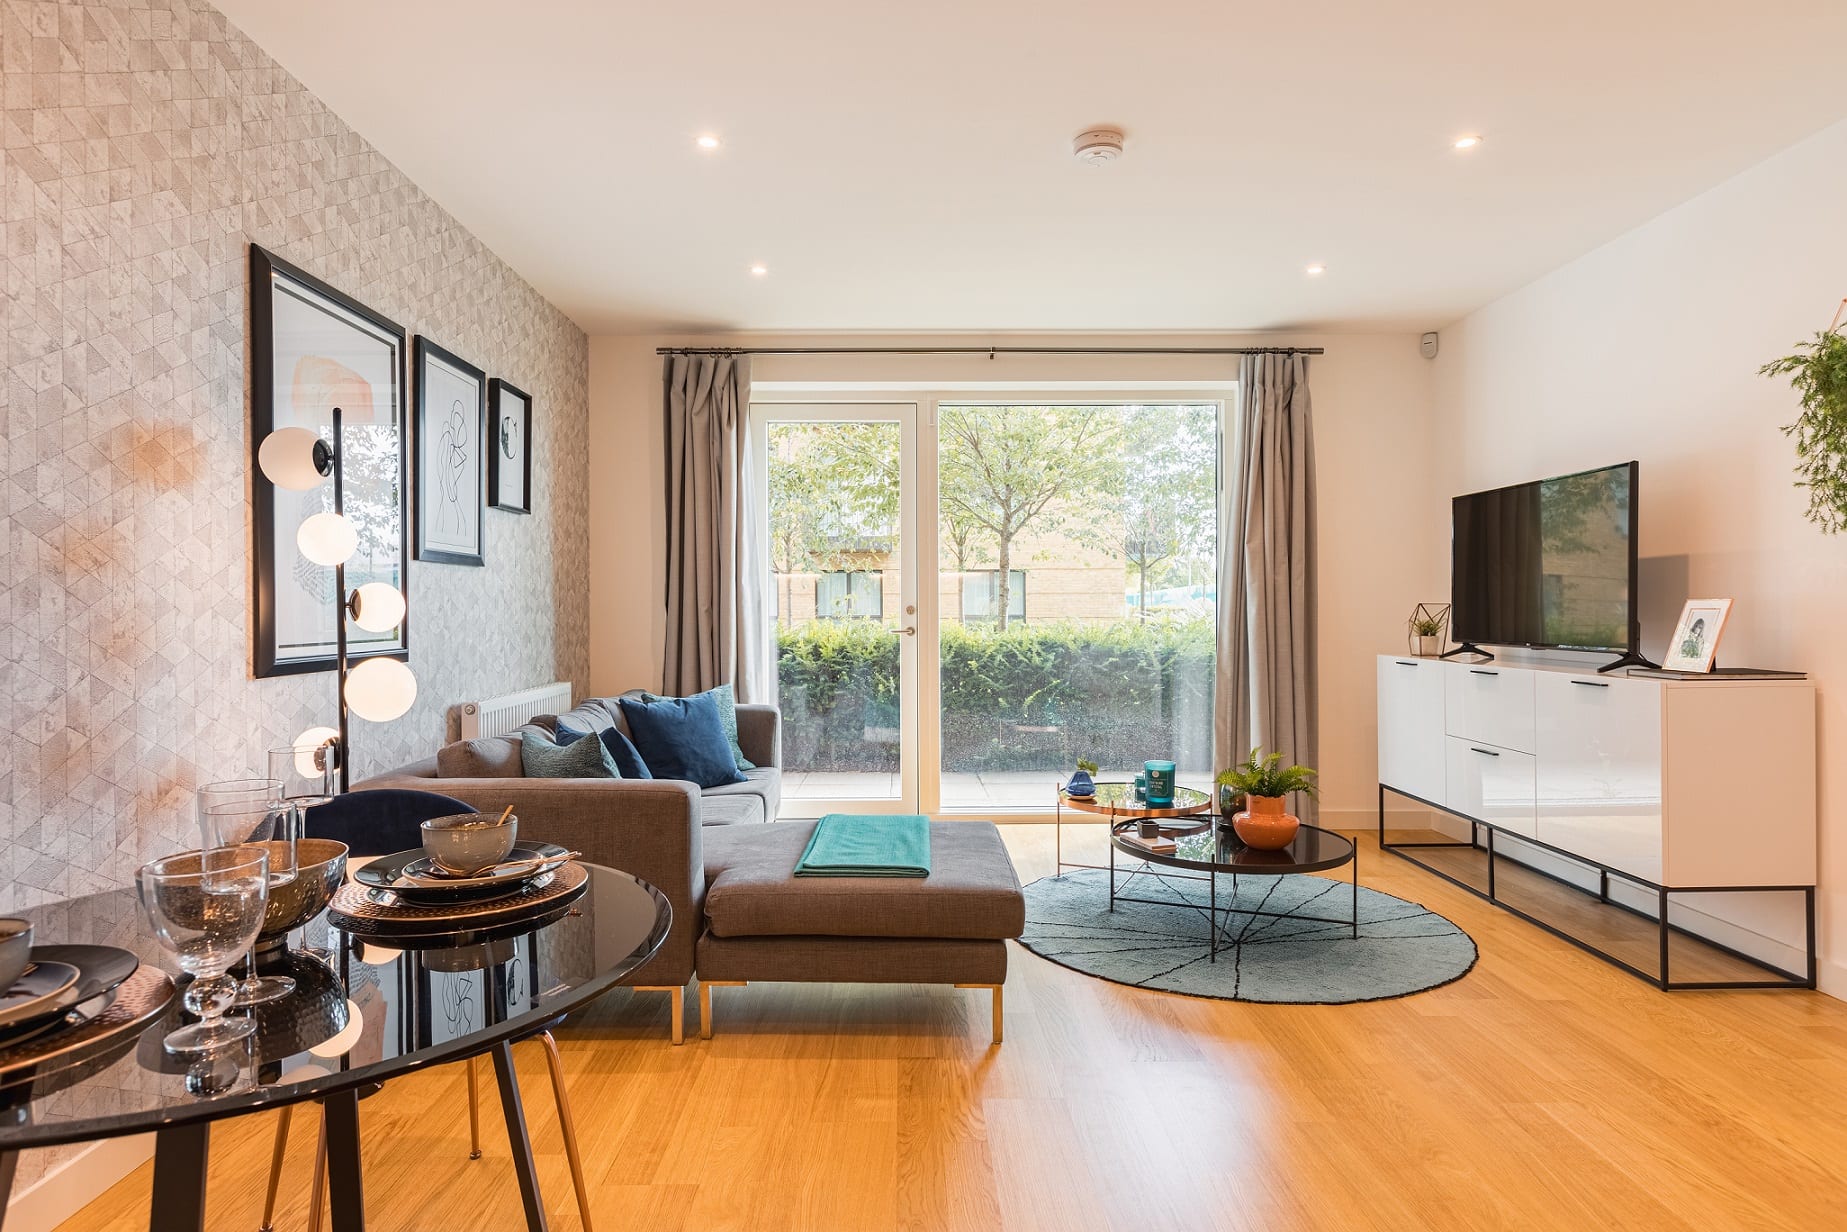 Interior show home photography of Catalyst's ARRO development - Shared Ownership and Help to Buy homes available on Share to Buy